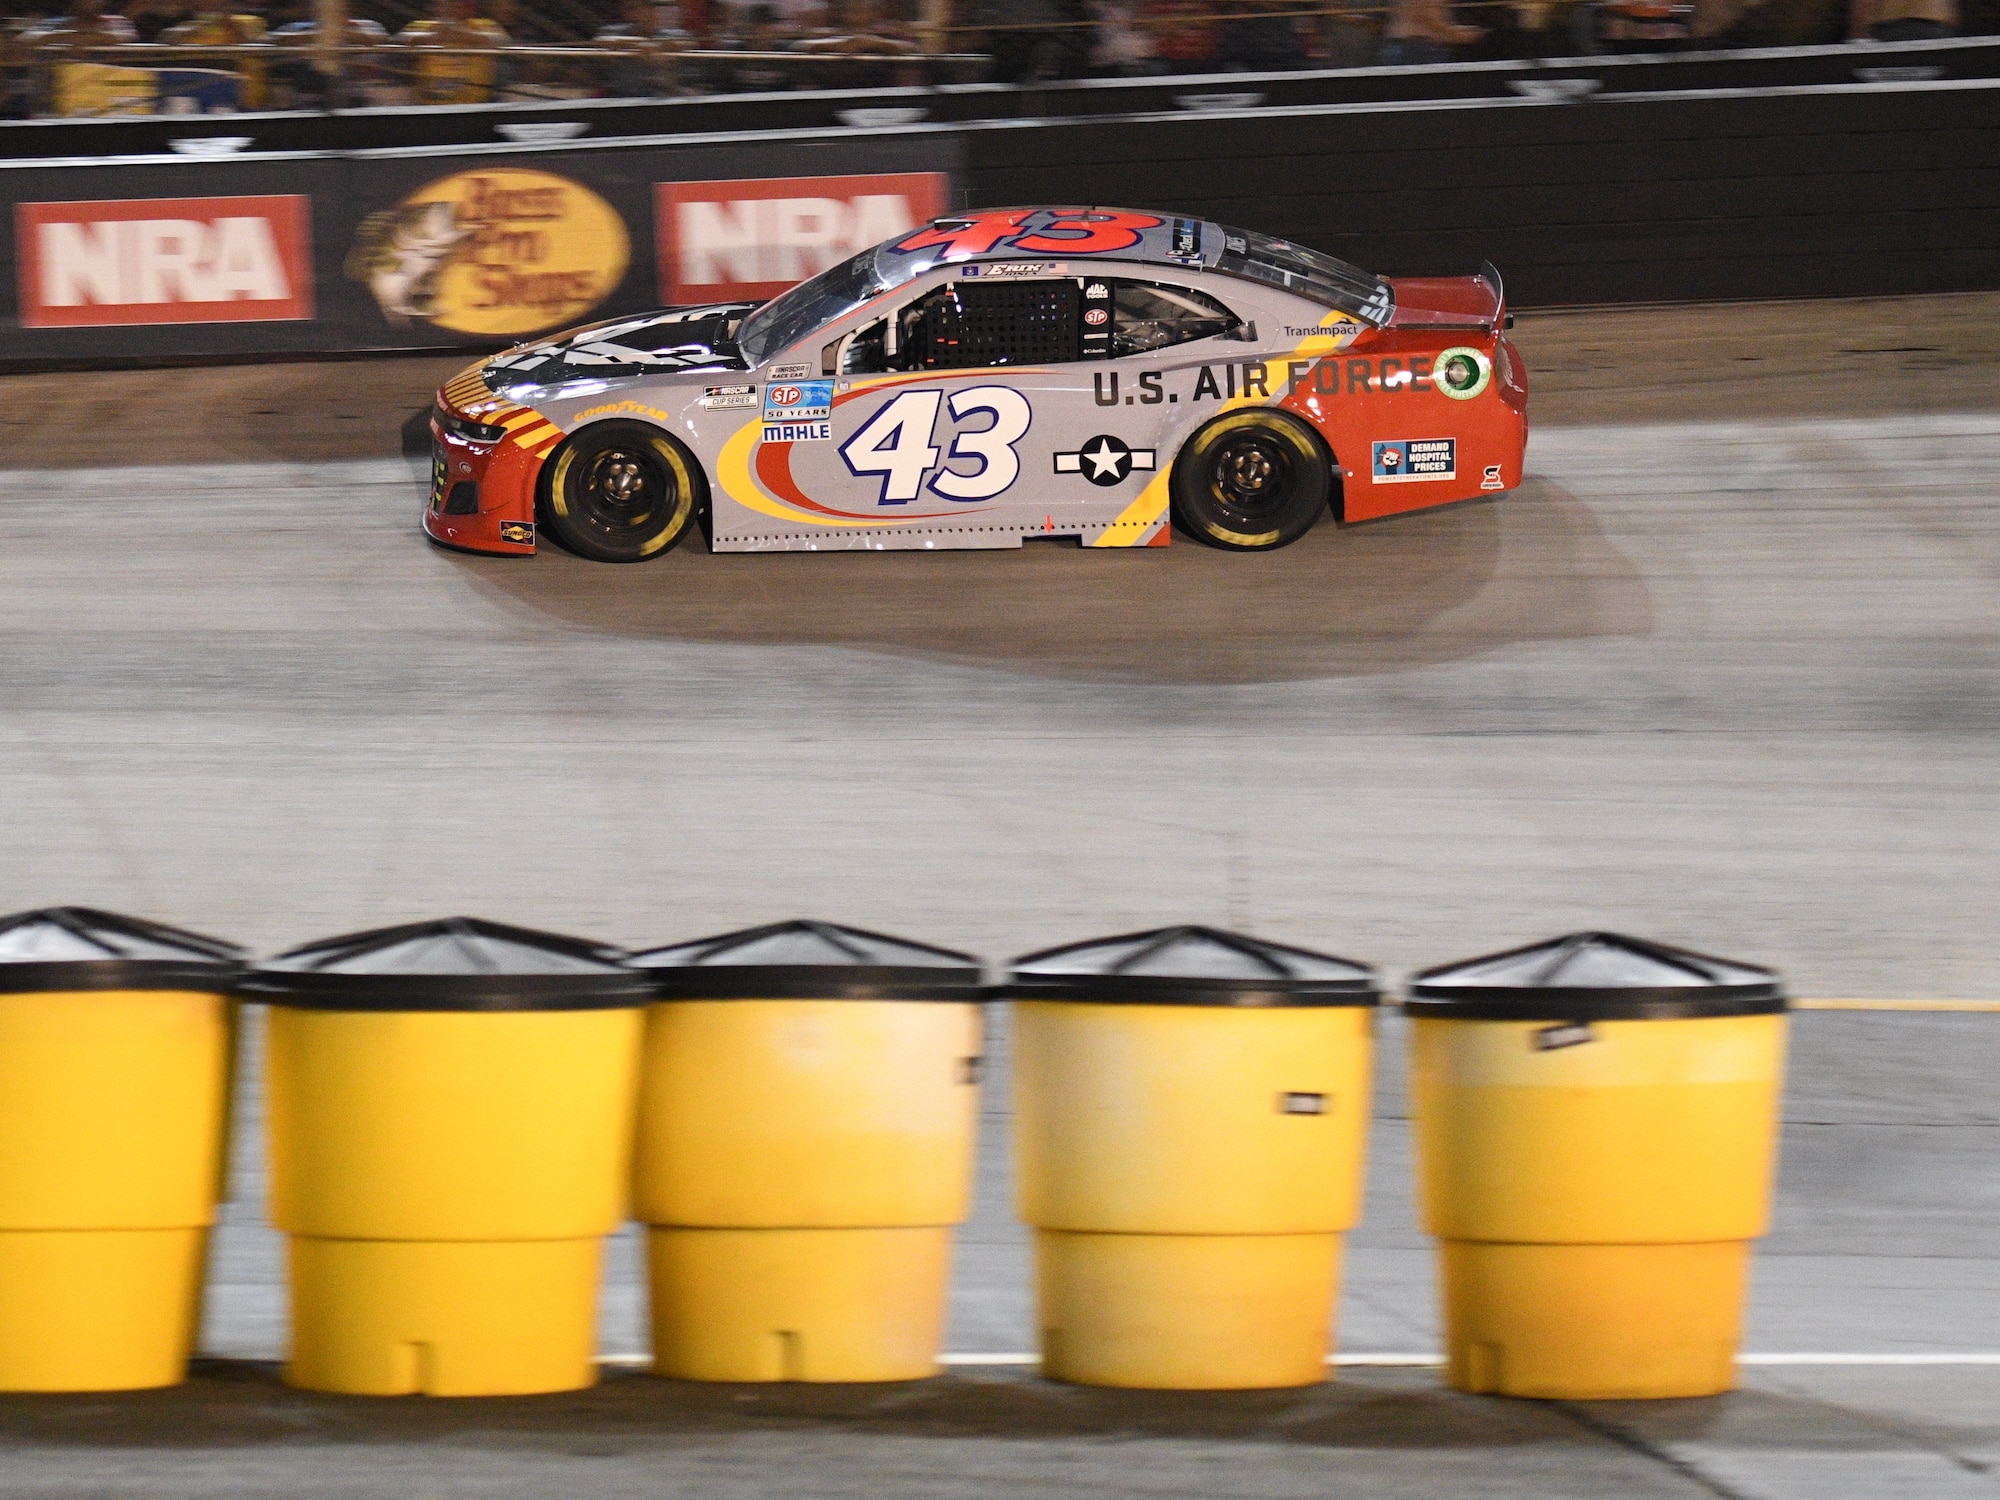 The Air Force-sponsored No. 43 racecar enters a straightaway at Bristol Motor Speedway, Bristol, Tennessee during the Bass Pro Shops NRA Night Race NASCAR Cup Series.